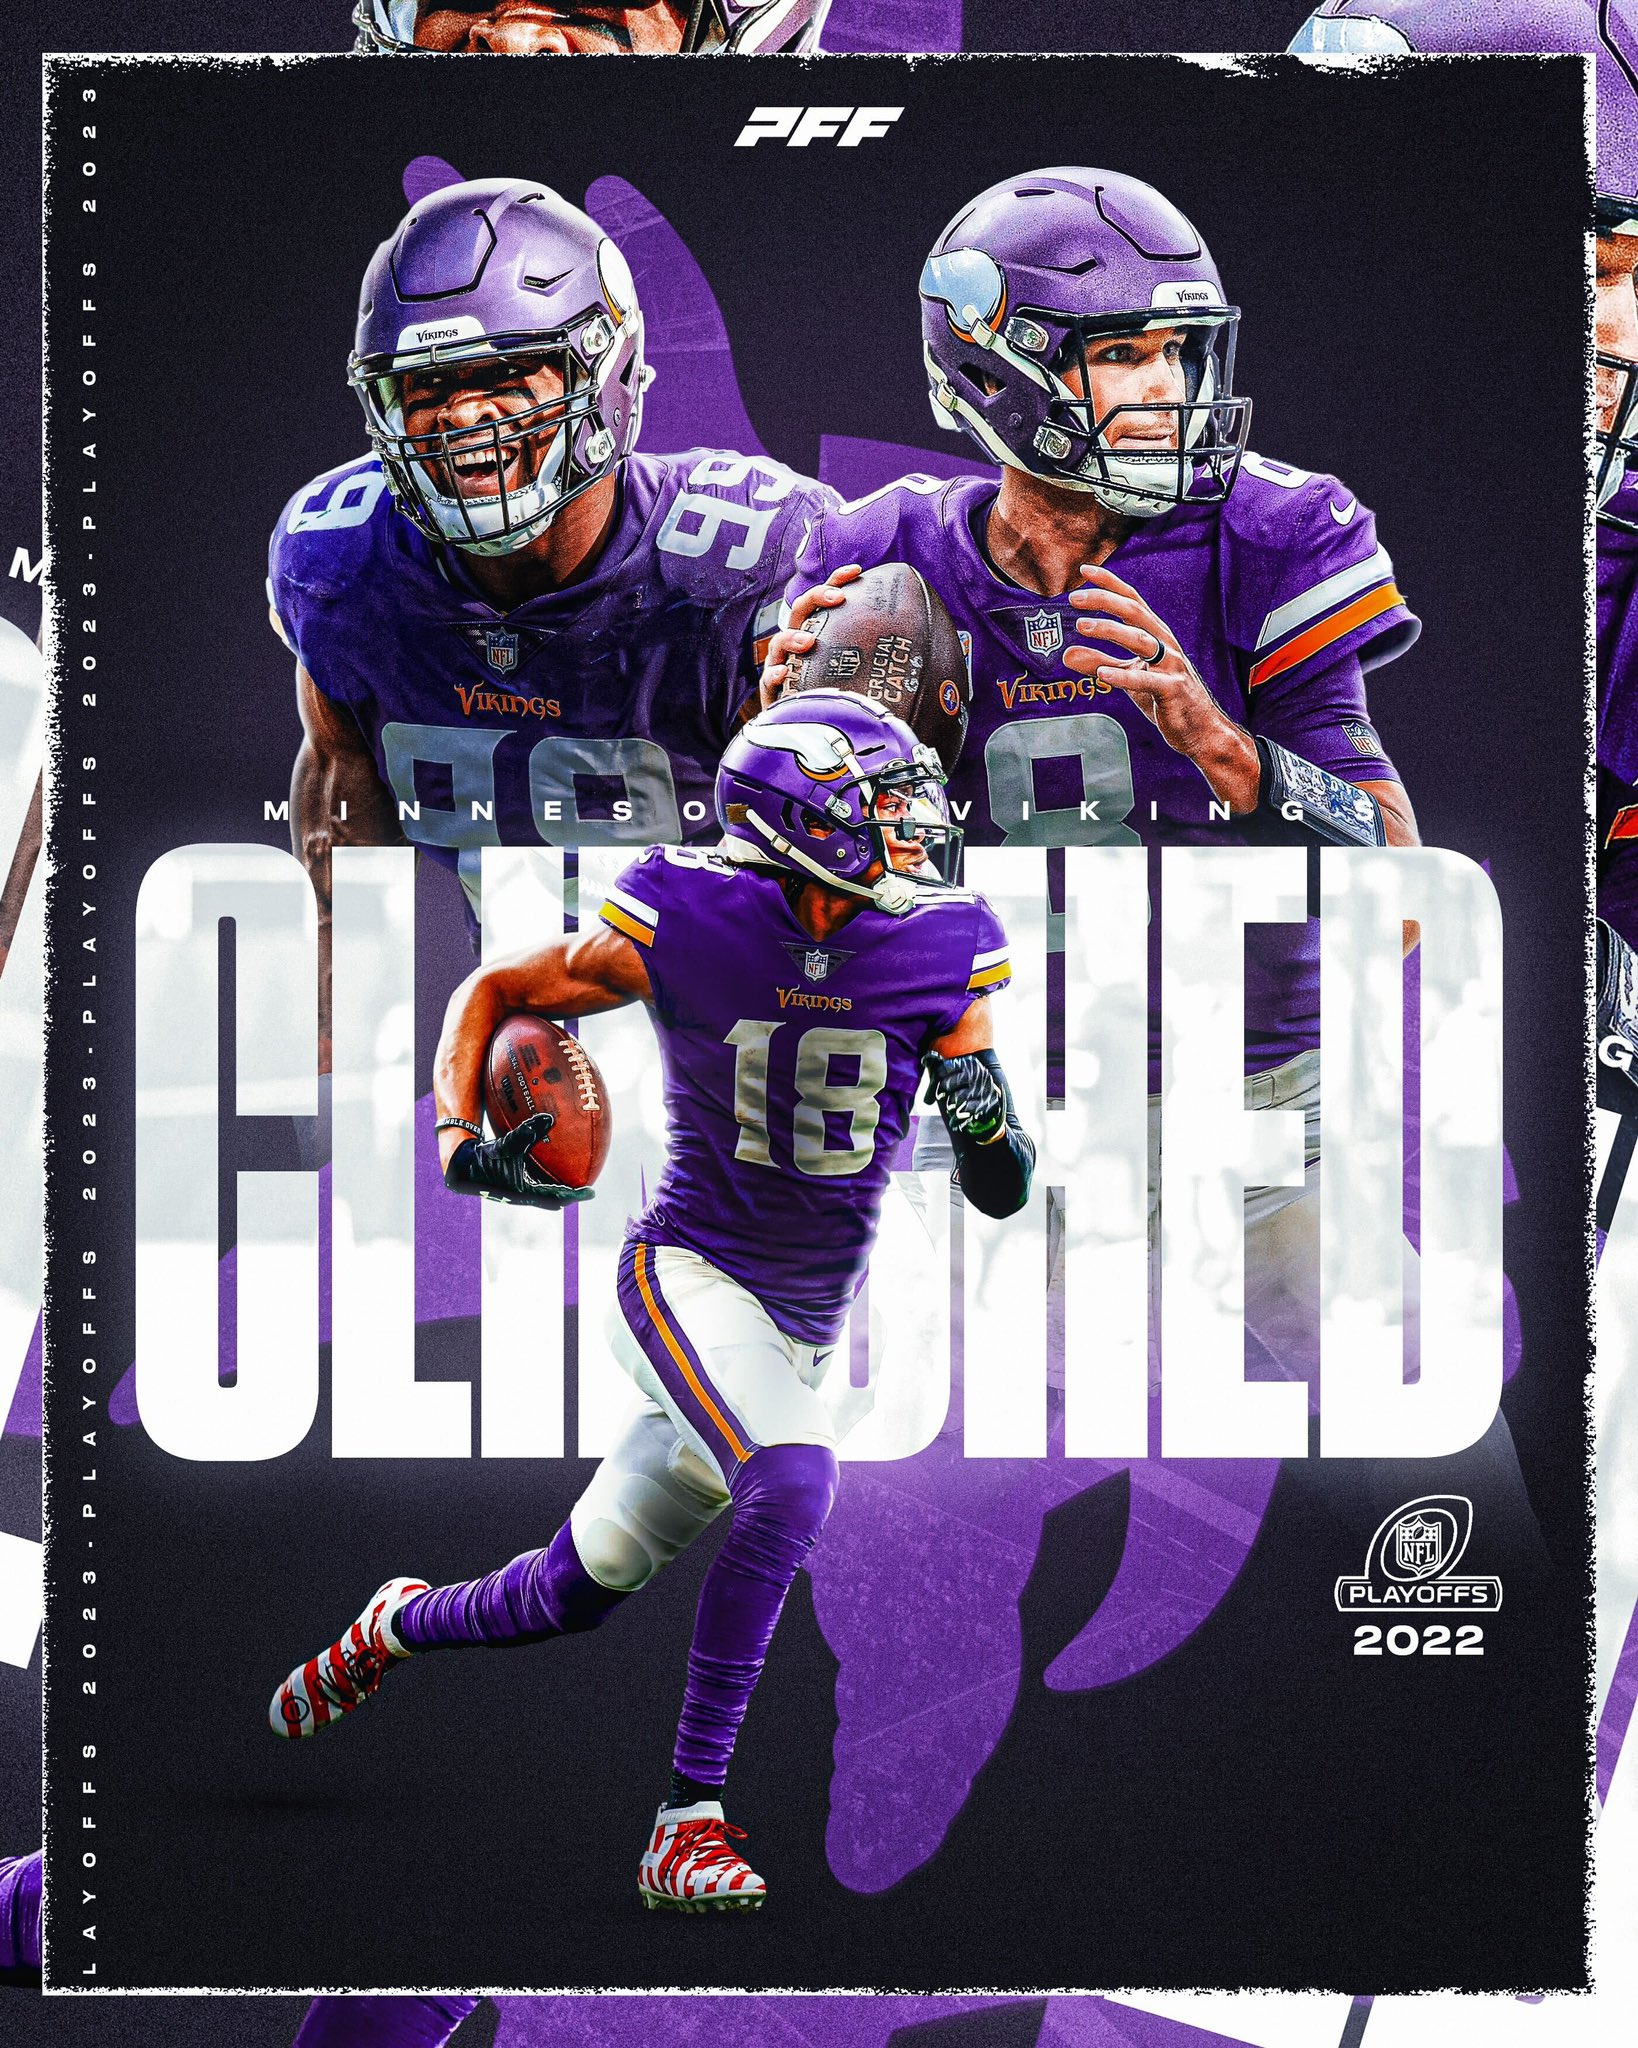 PFF on X: THE VIKINGS CLINCH THE DIVISION WITH THE BIGGEST